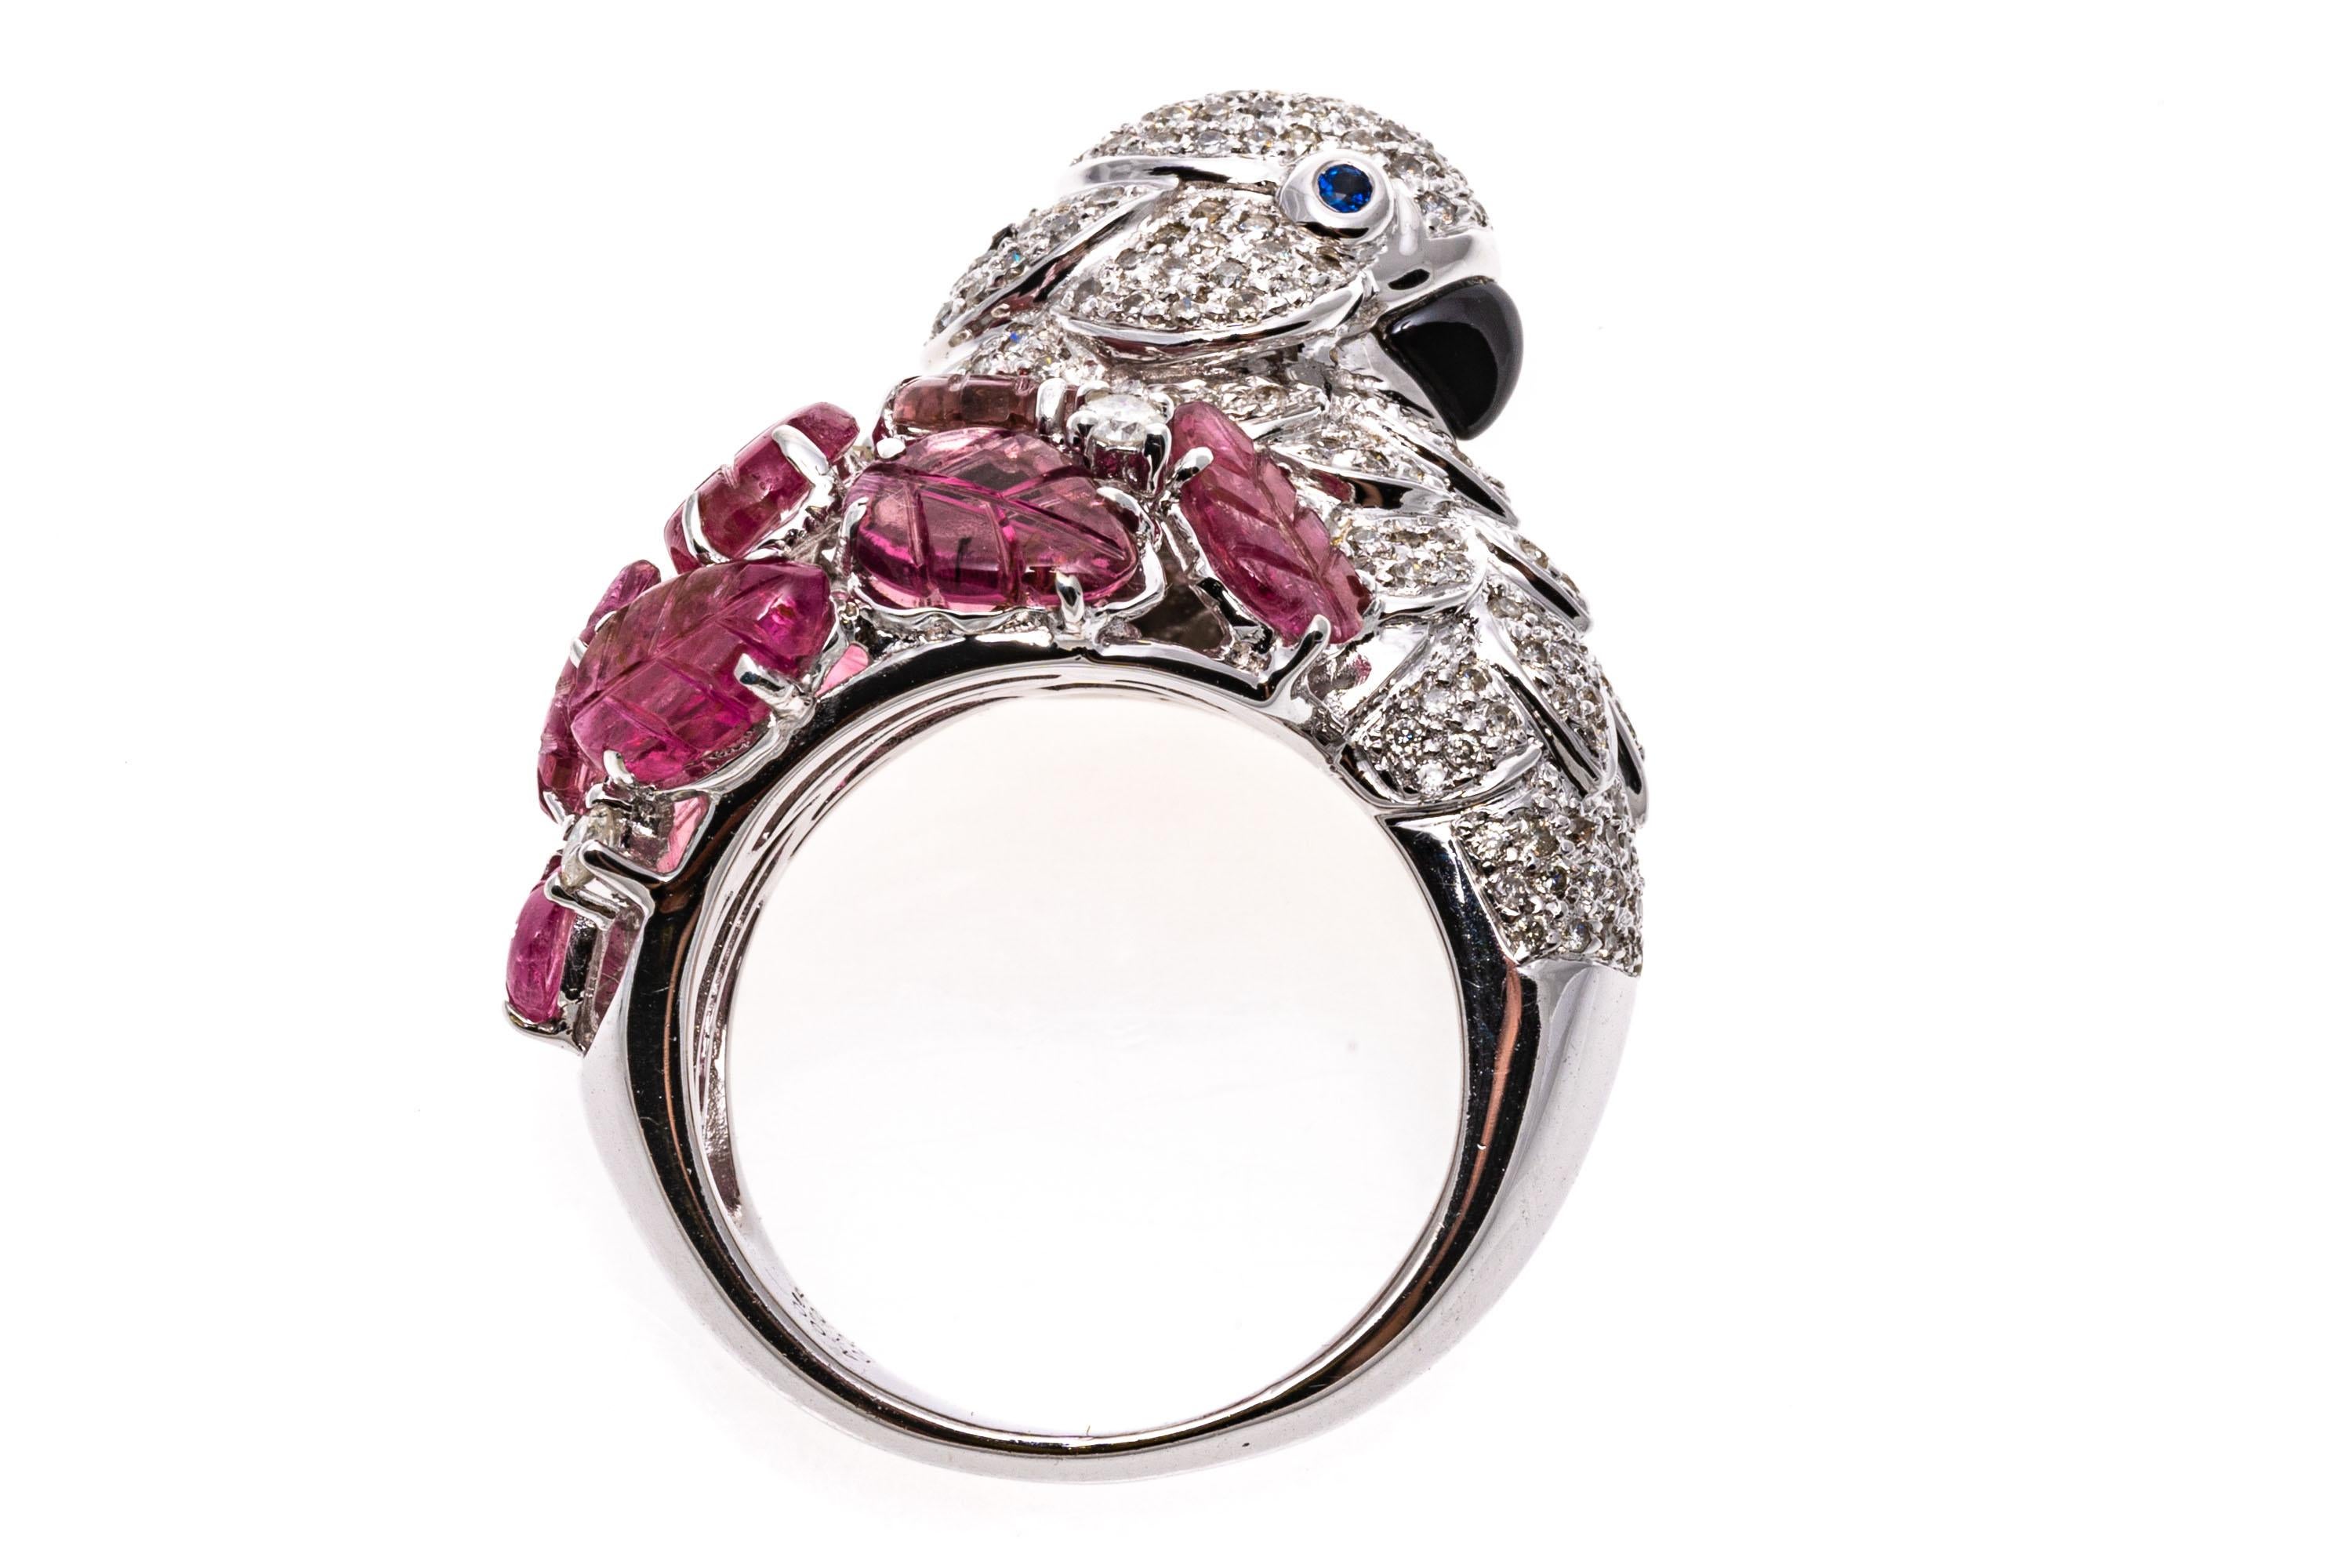 18k white gold ring. This whimsical ring is a white gold, figural flamingo, set with a head and neck of round faceted, pave diamond set feathers, 1.30 TCW, decorated with round faceted blue sapphire, bezel set eyes, 0.03 TCW and a beak made out of